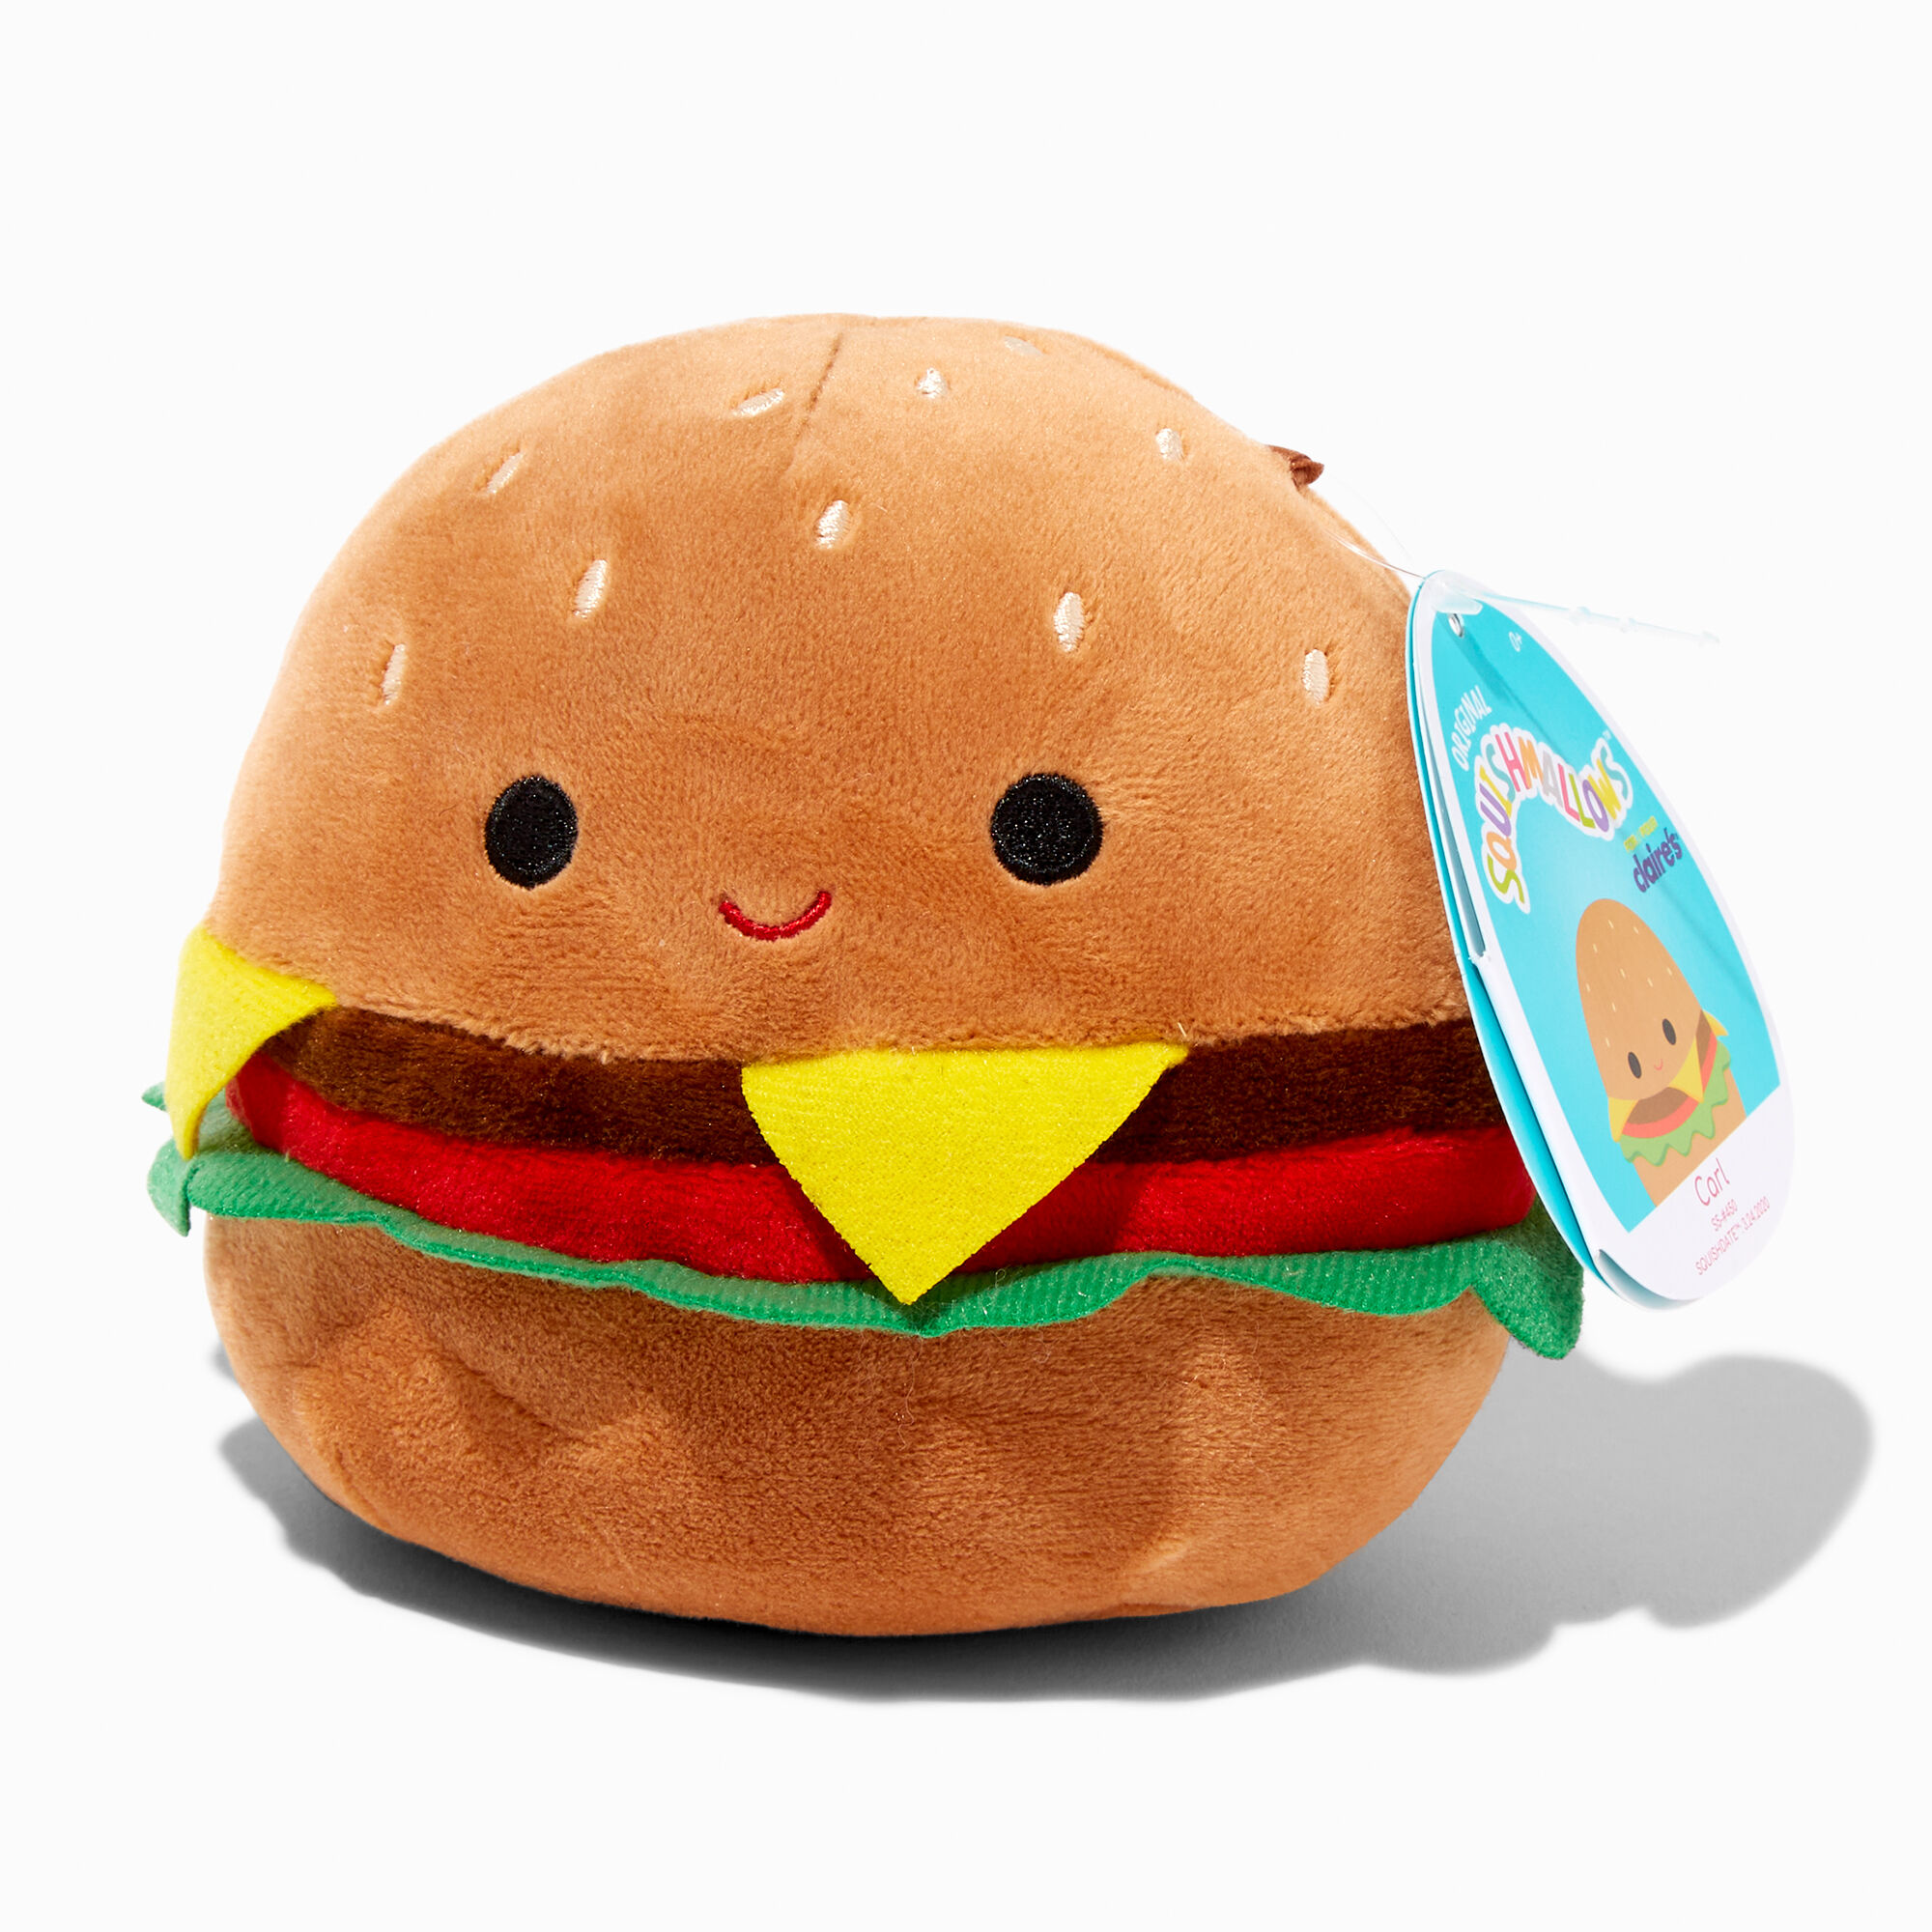 NEW Claires Exclusive Cheese Burger 5 Inch Squishmallow Toy Plush